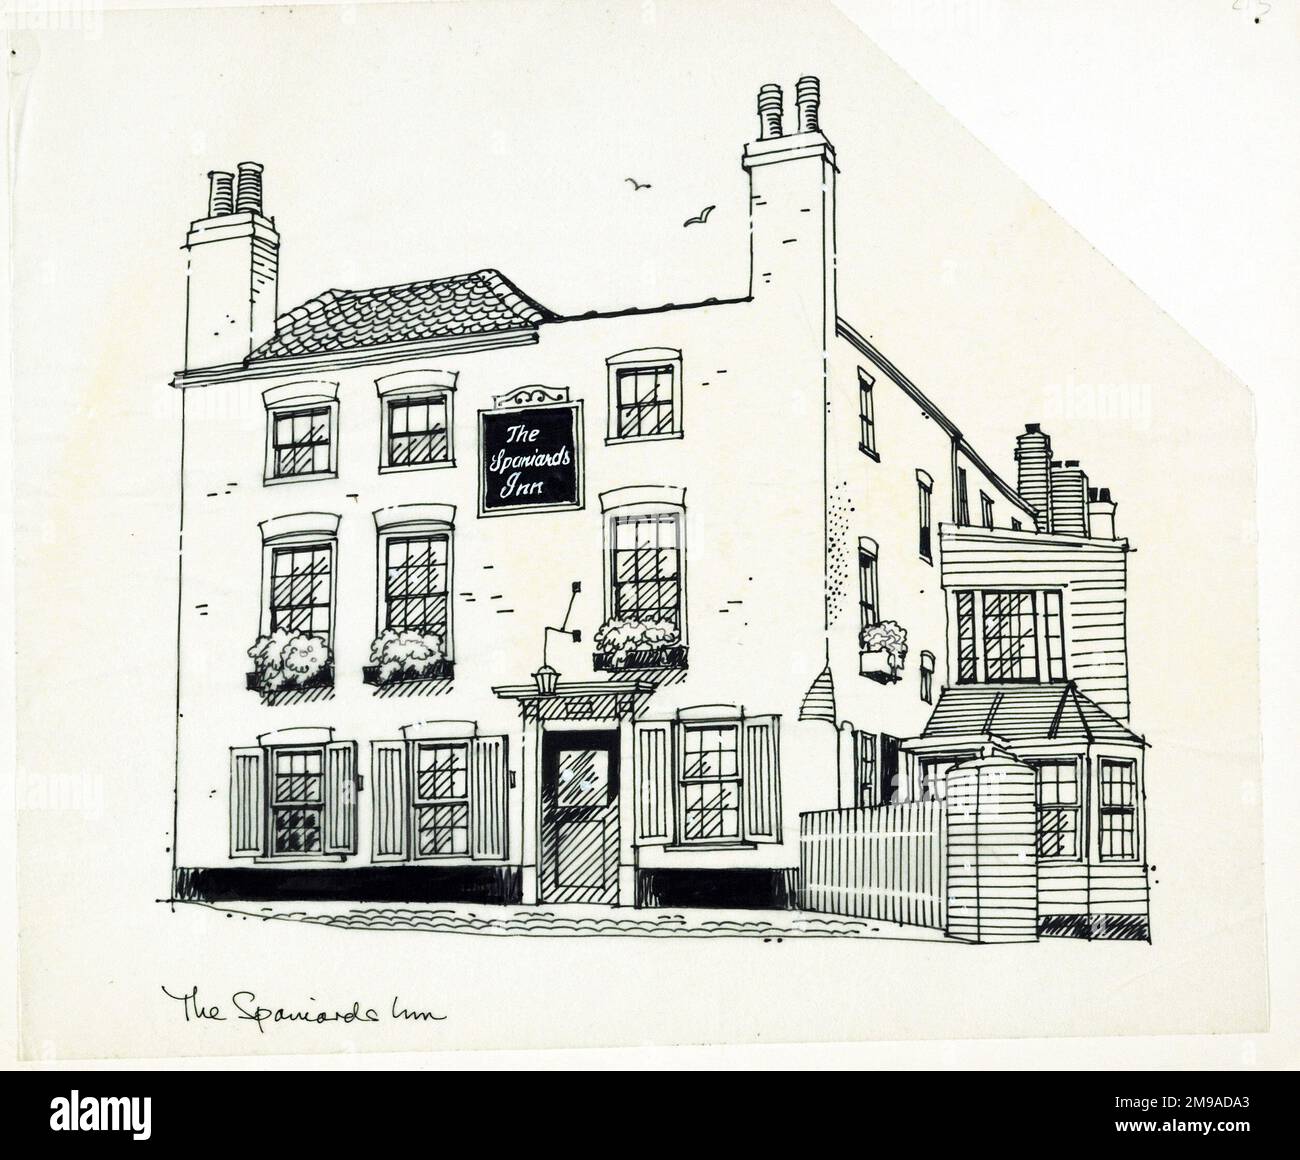 Sketch of  Spaniards Inn, Hampstead, London. The main side of the print (shown here) depicts: Sketch of the pub.  The back of the print (available on request) details: Nothing for the Spaniards Inn, Hampstead, London NW3 7JJ. As of July 2018 . Castle (Mitchells & Butlers) Stock Photo